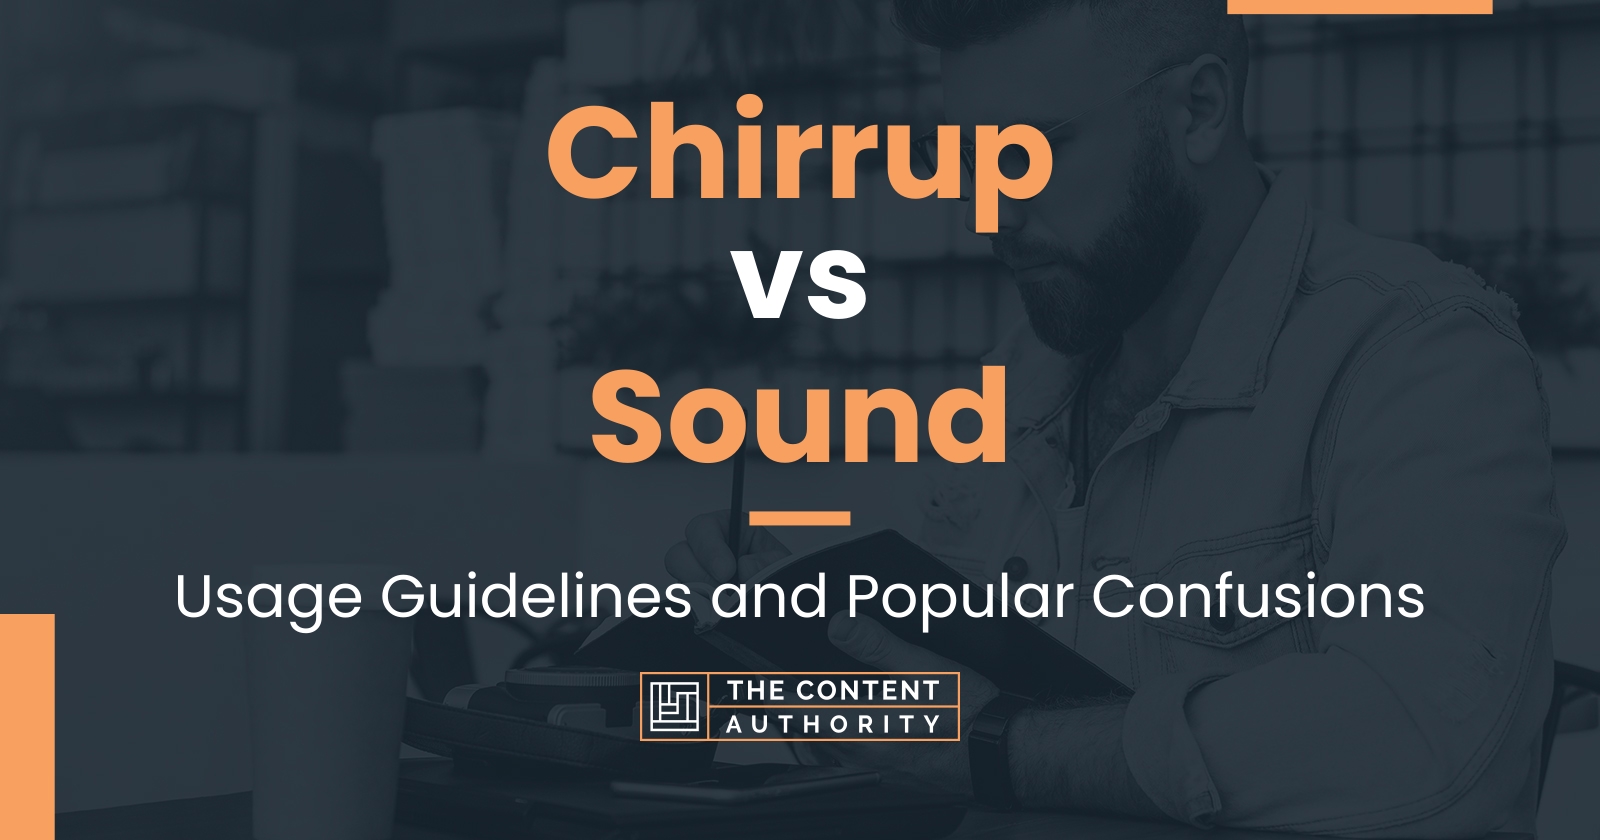 Chirrup vs Sound: Usage Guidelines and Popular Confusions